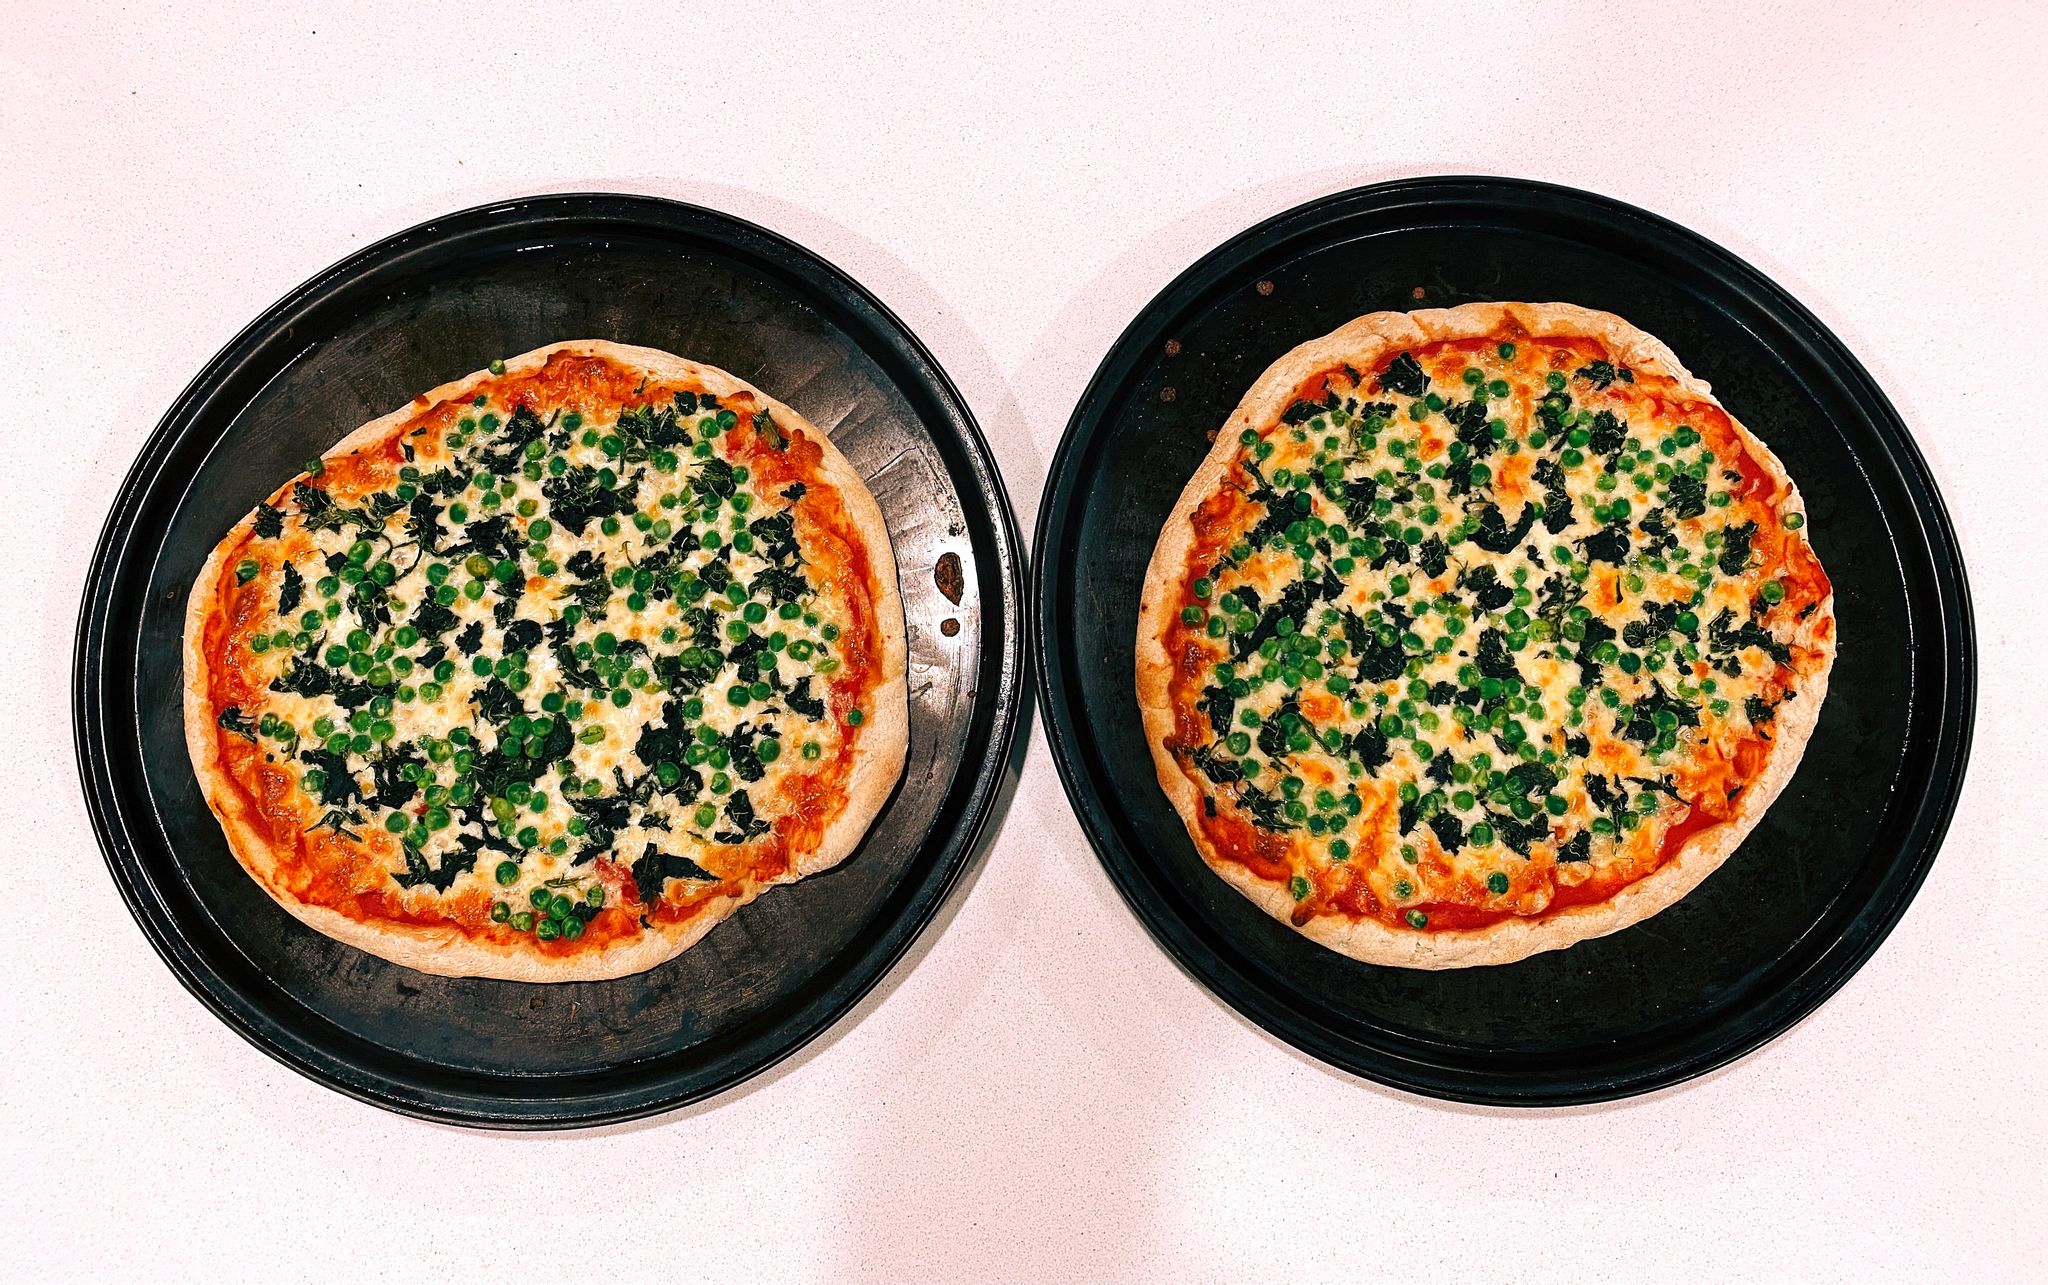 A photo of two pizzas with spinach and peas on them, sitting on pizza trays.